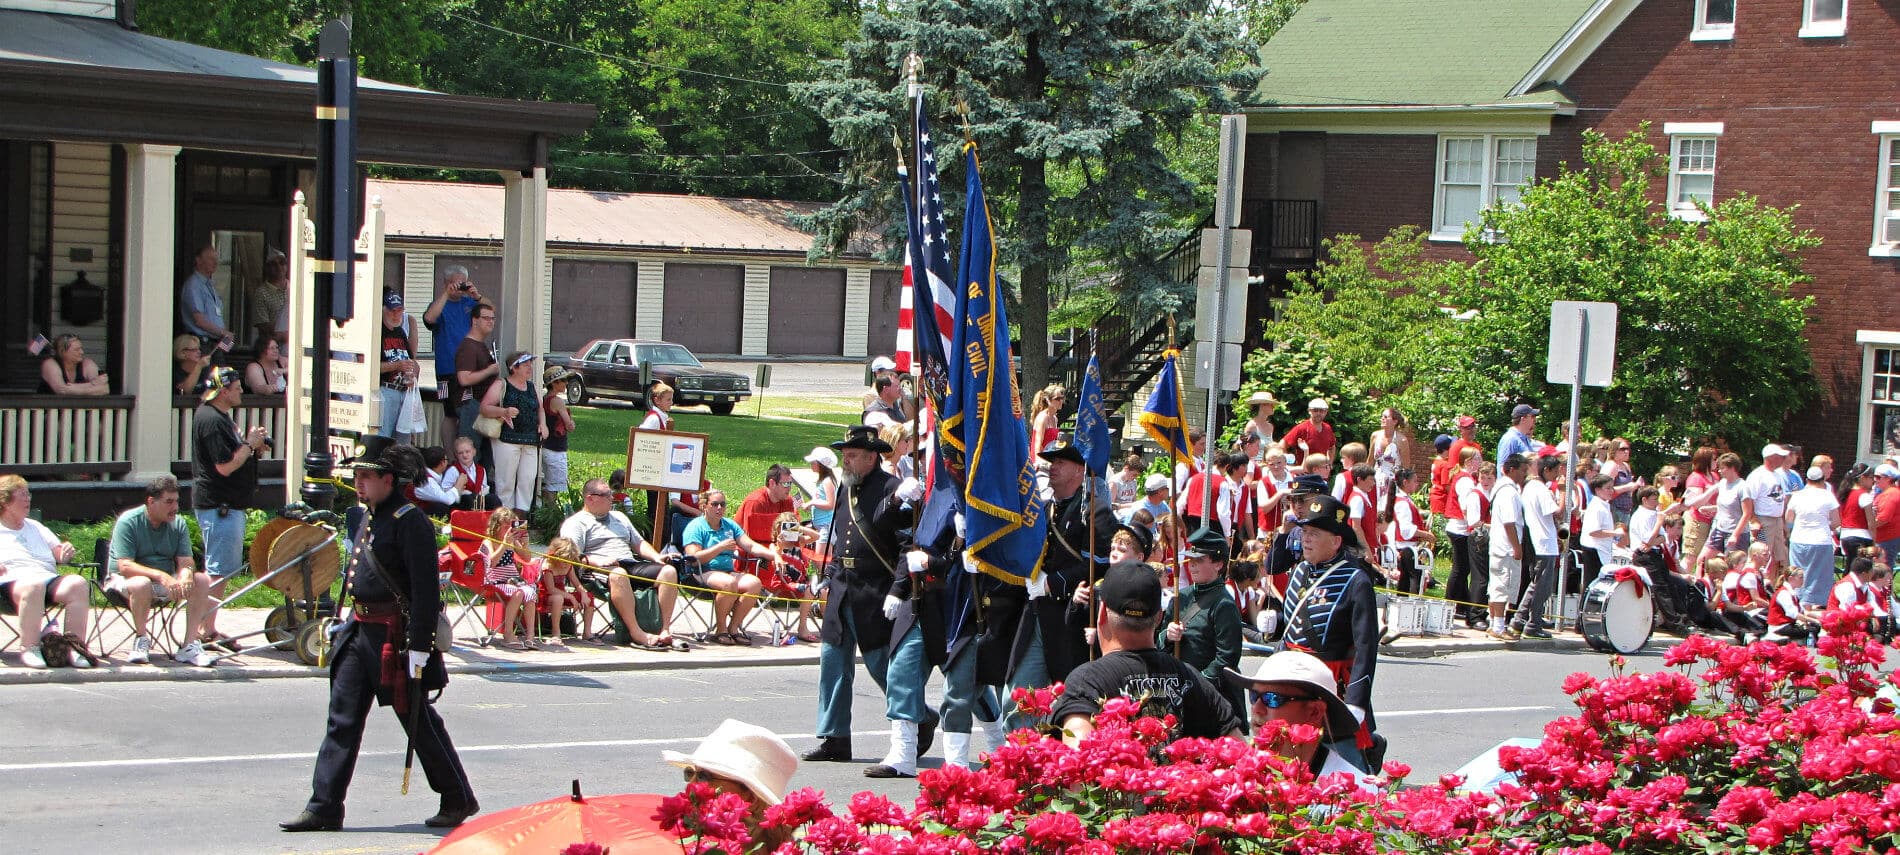 Armed forces in their uniforms walking down the crowd-lined street carrying flags during a city festival